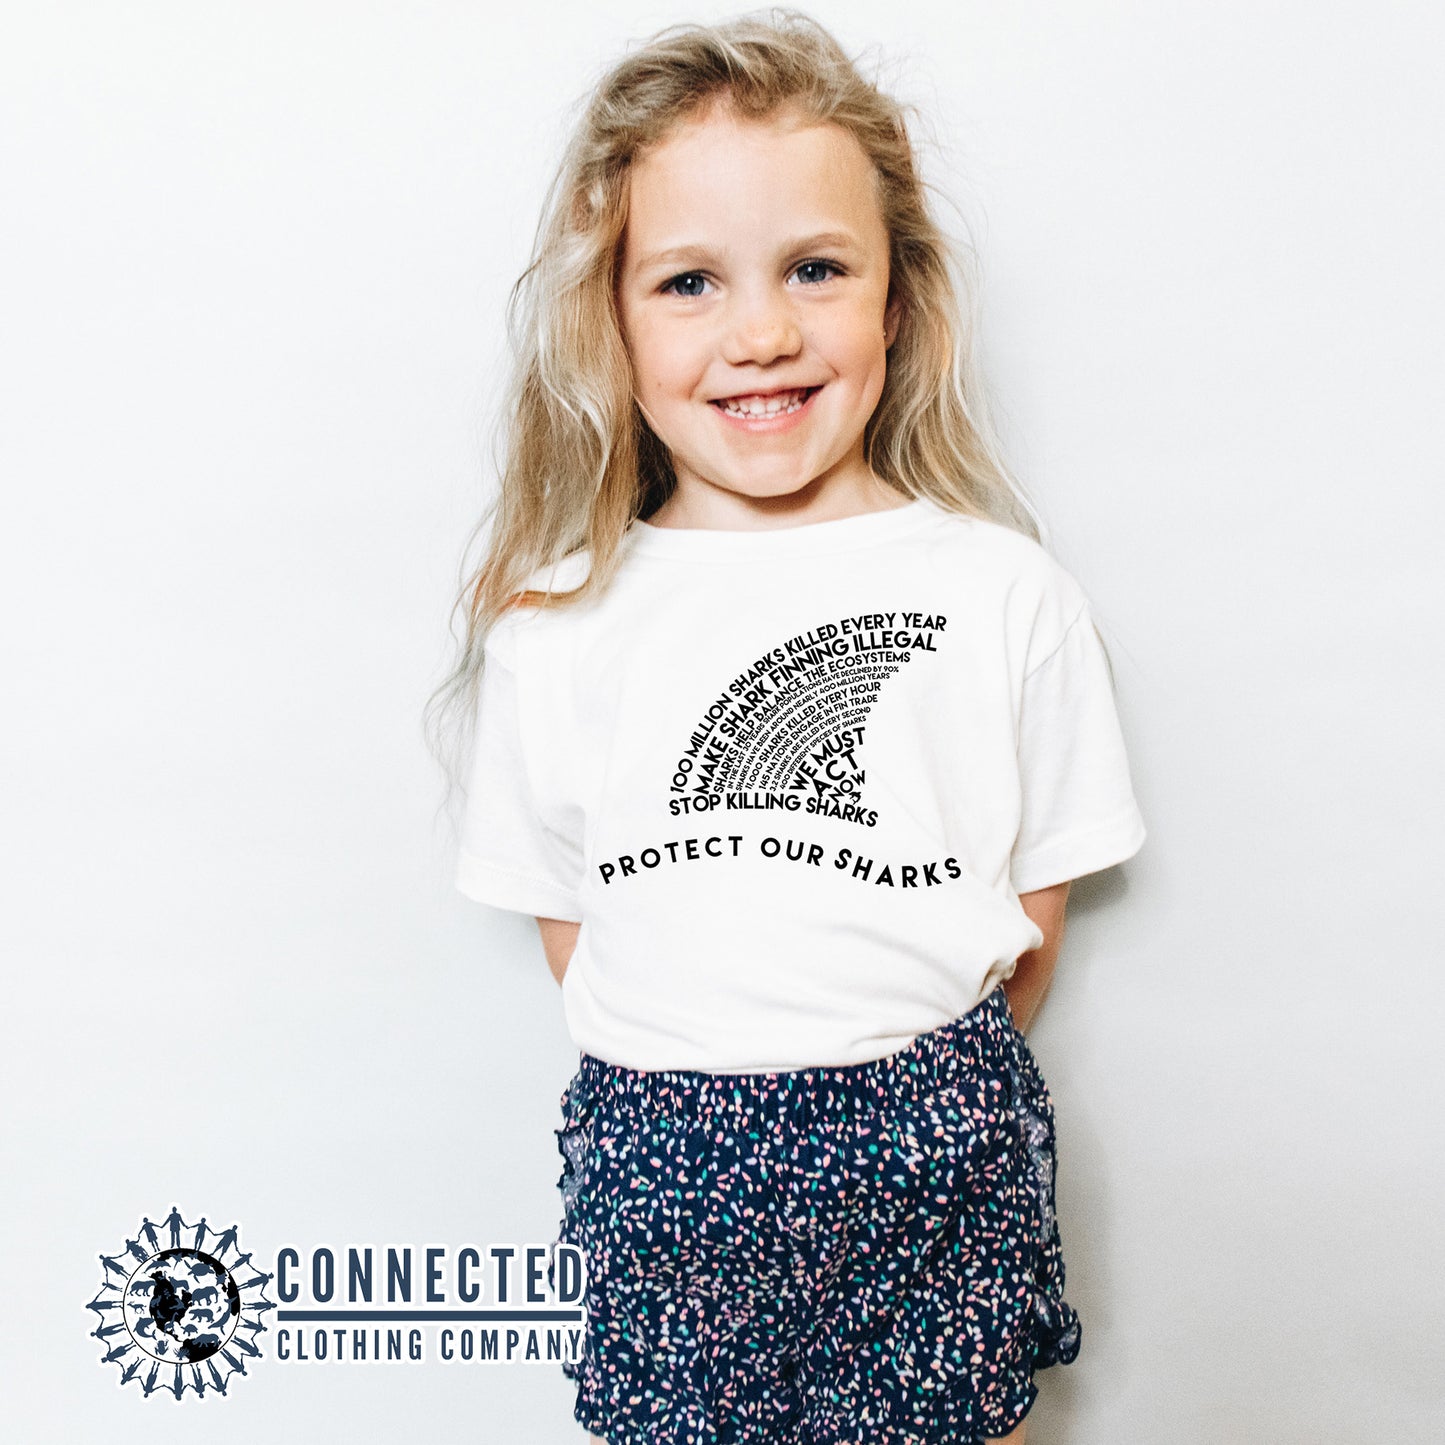 Toddler Model Wearing White Protect Our Sharks Toddler Short-Sleeve Tee - sweetsherriloudesigns - 10% of profits donated to Oceana shark conservation